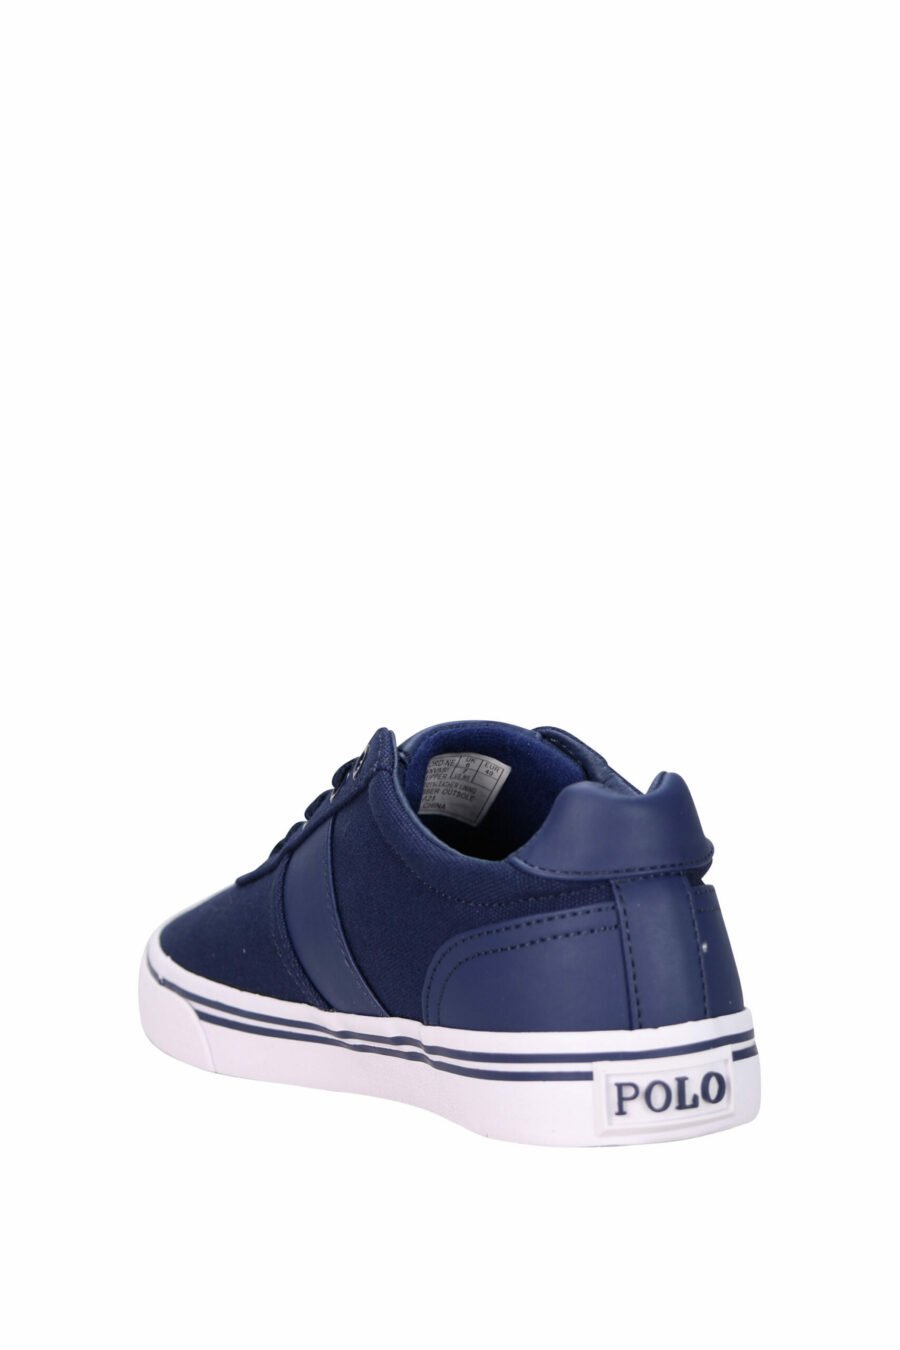 Dark blue trainers with mini-logo "polo" and white sole - 3611588439341 3 scaled